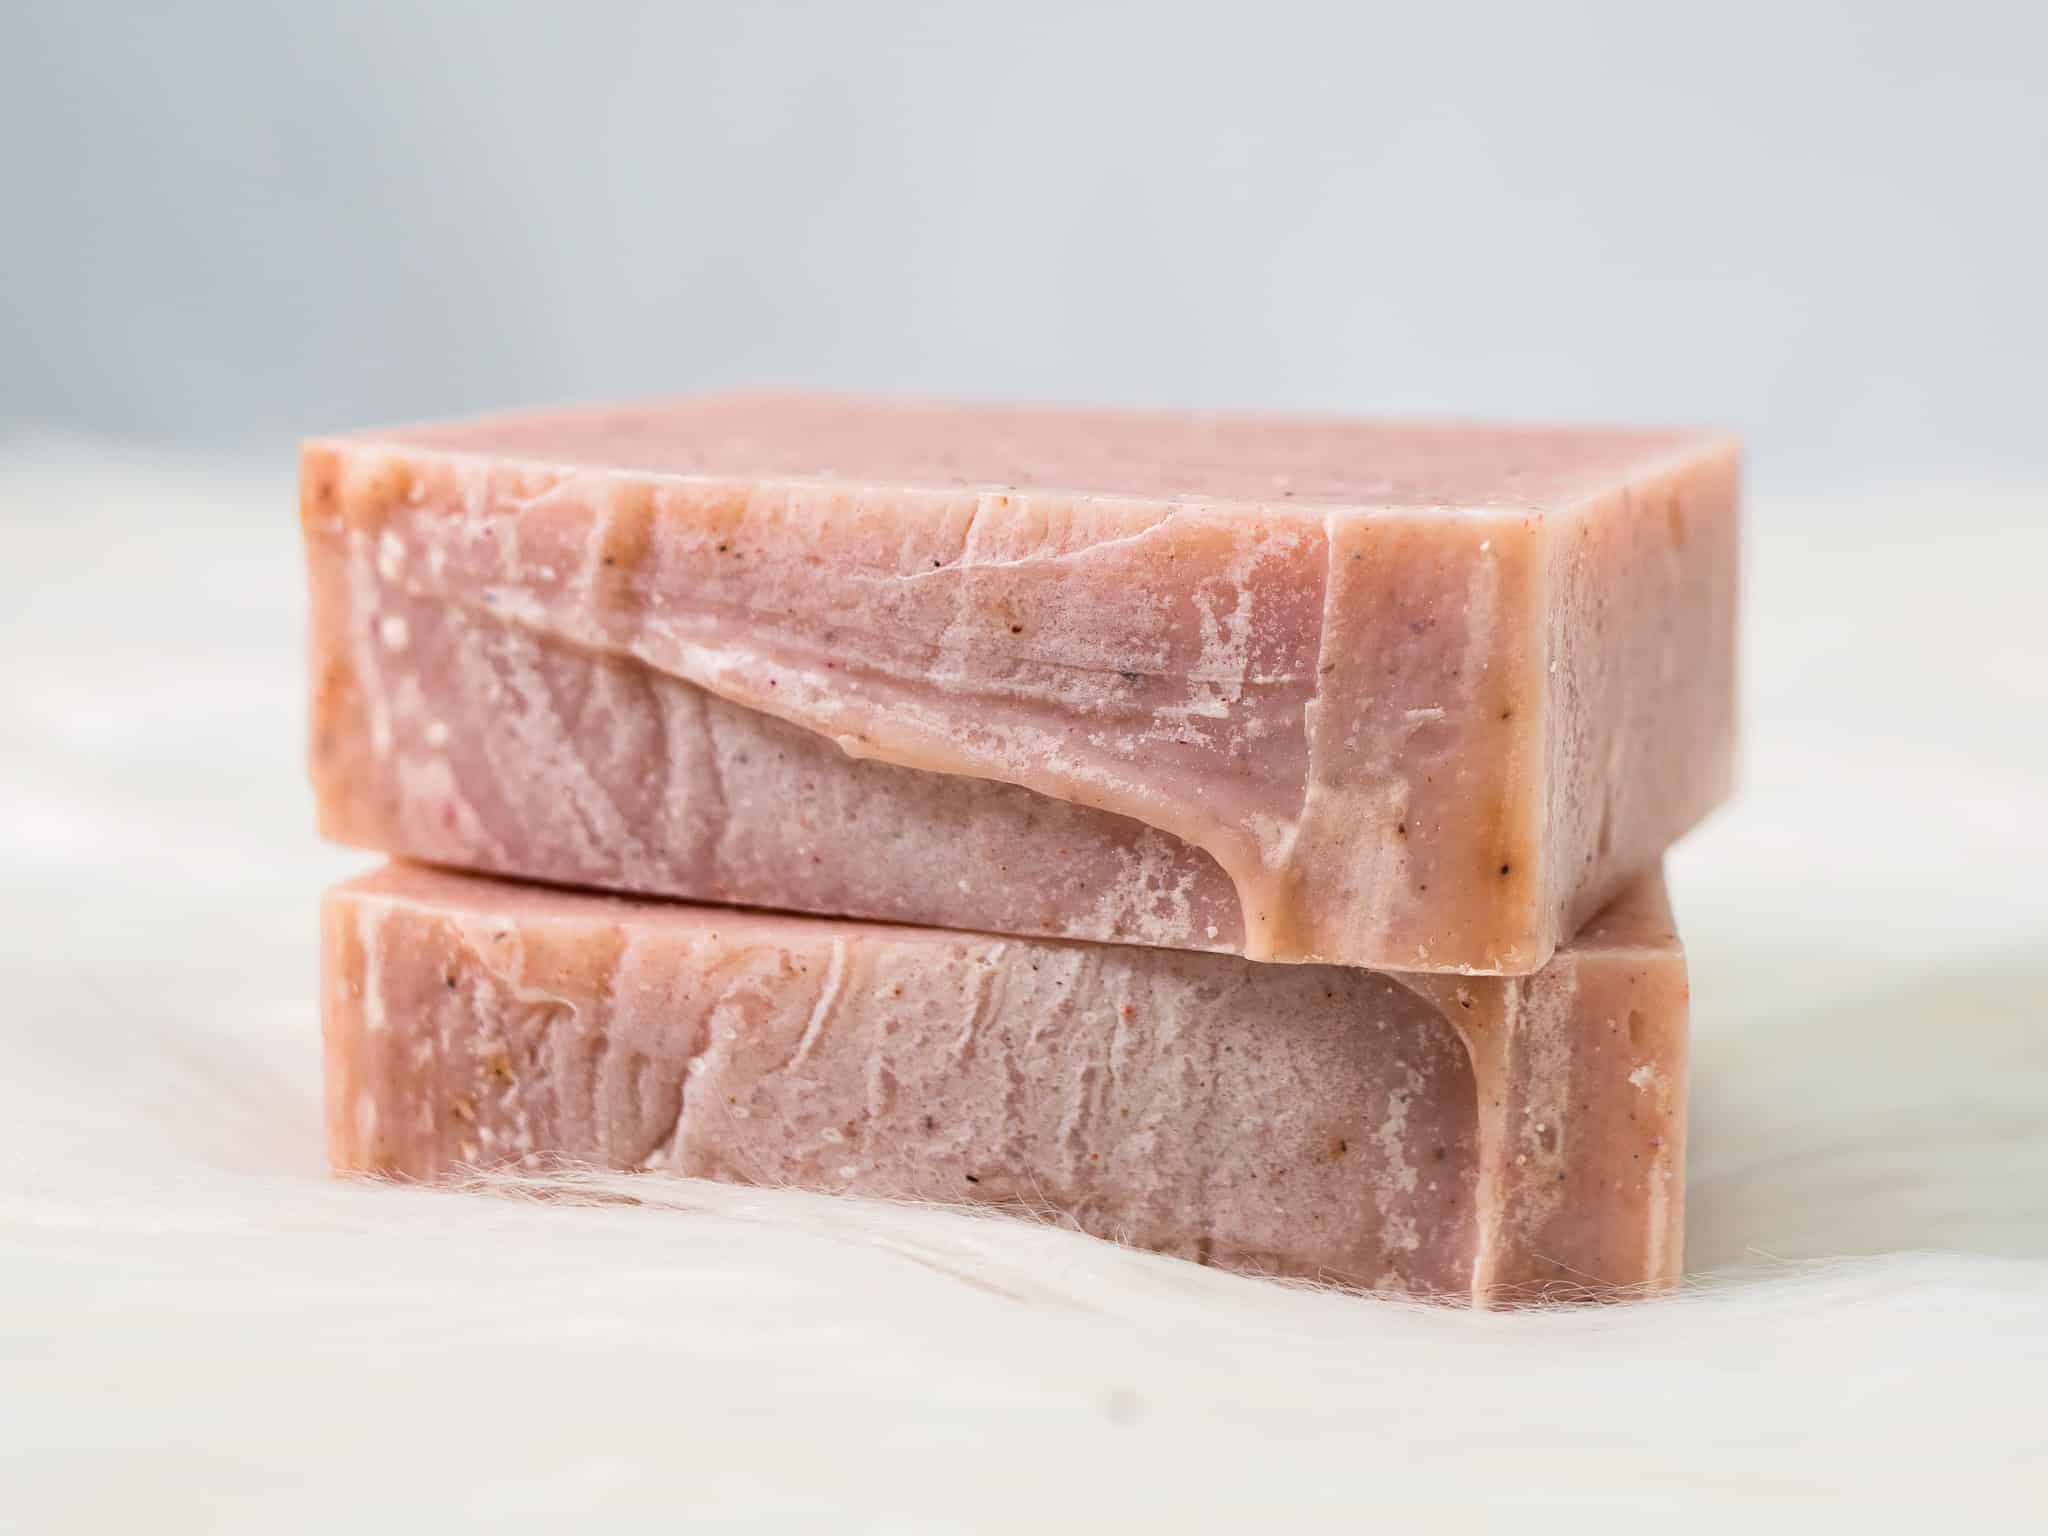 This Organic Lavender Vegan  Soap is made with love by Sudzy Bums! Shop more unique gift ideas today with Spots Initiatives, the best way to support creators.